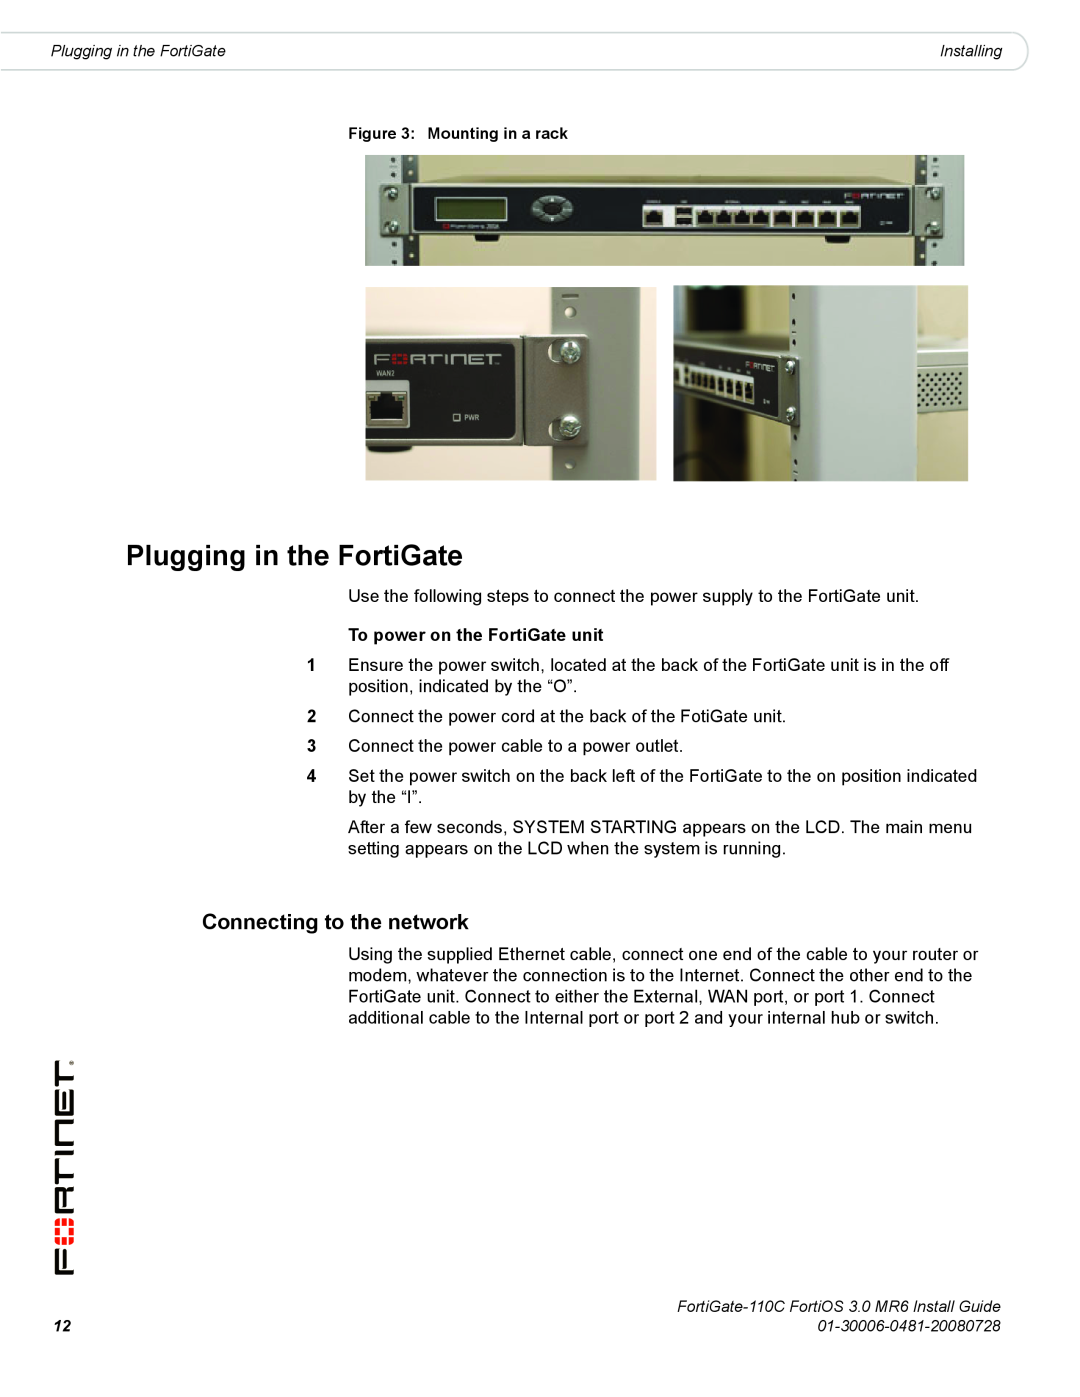 Fortinet 110C manual Plugging in the FortiGate, Connecting to the network, To power on the FortiGate unit 